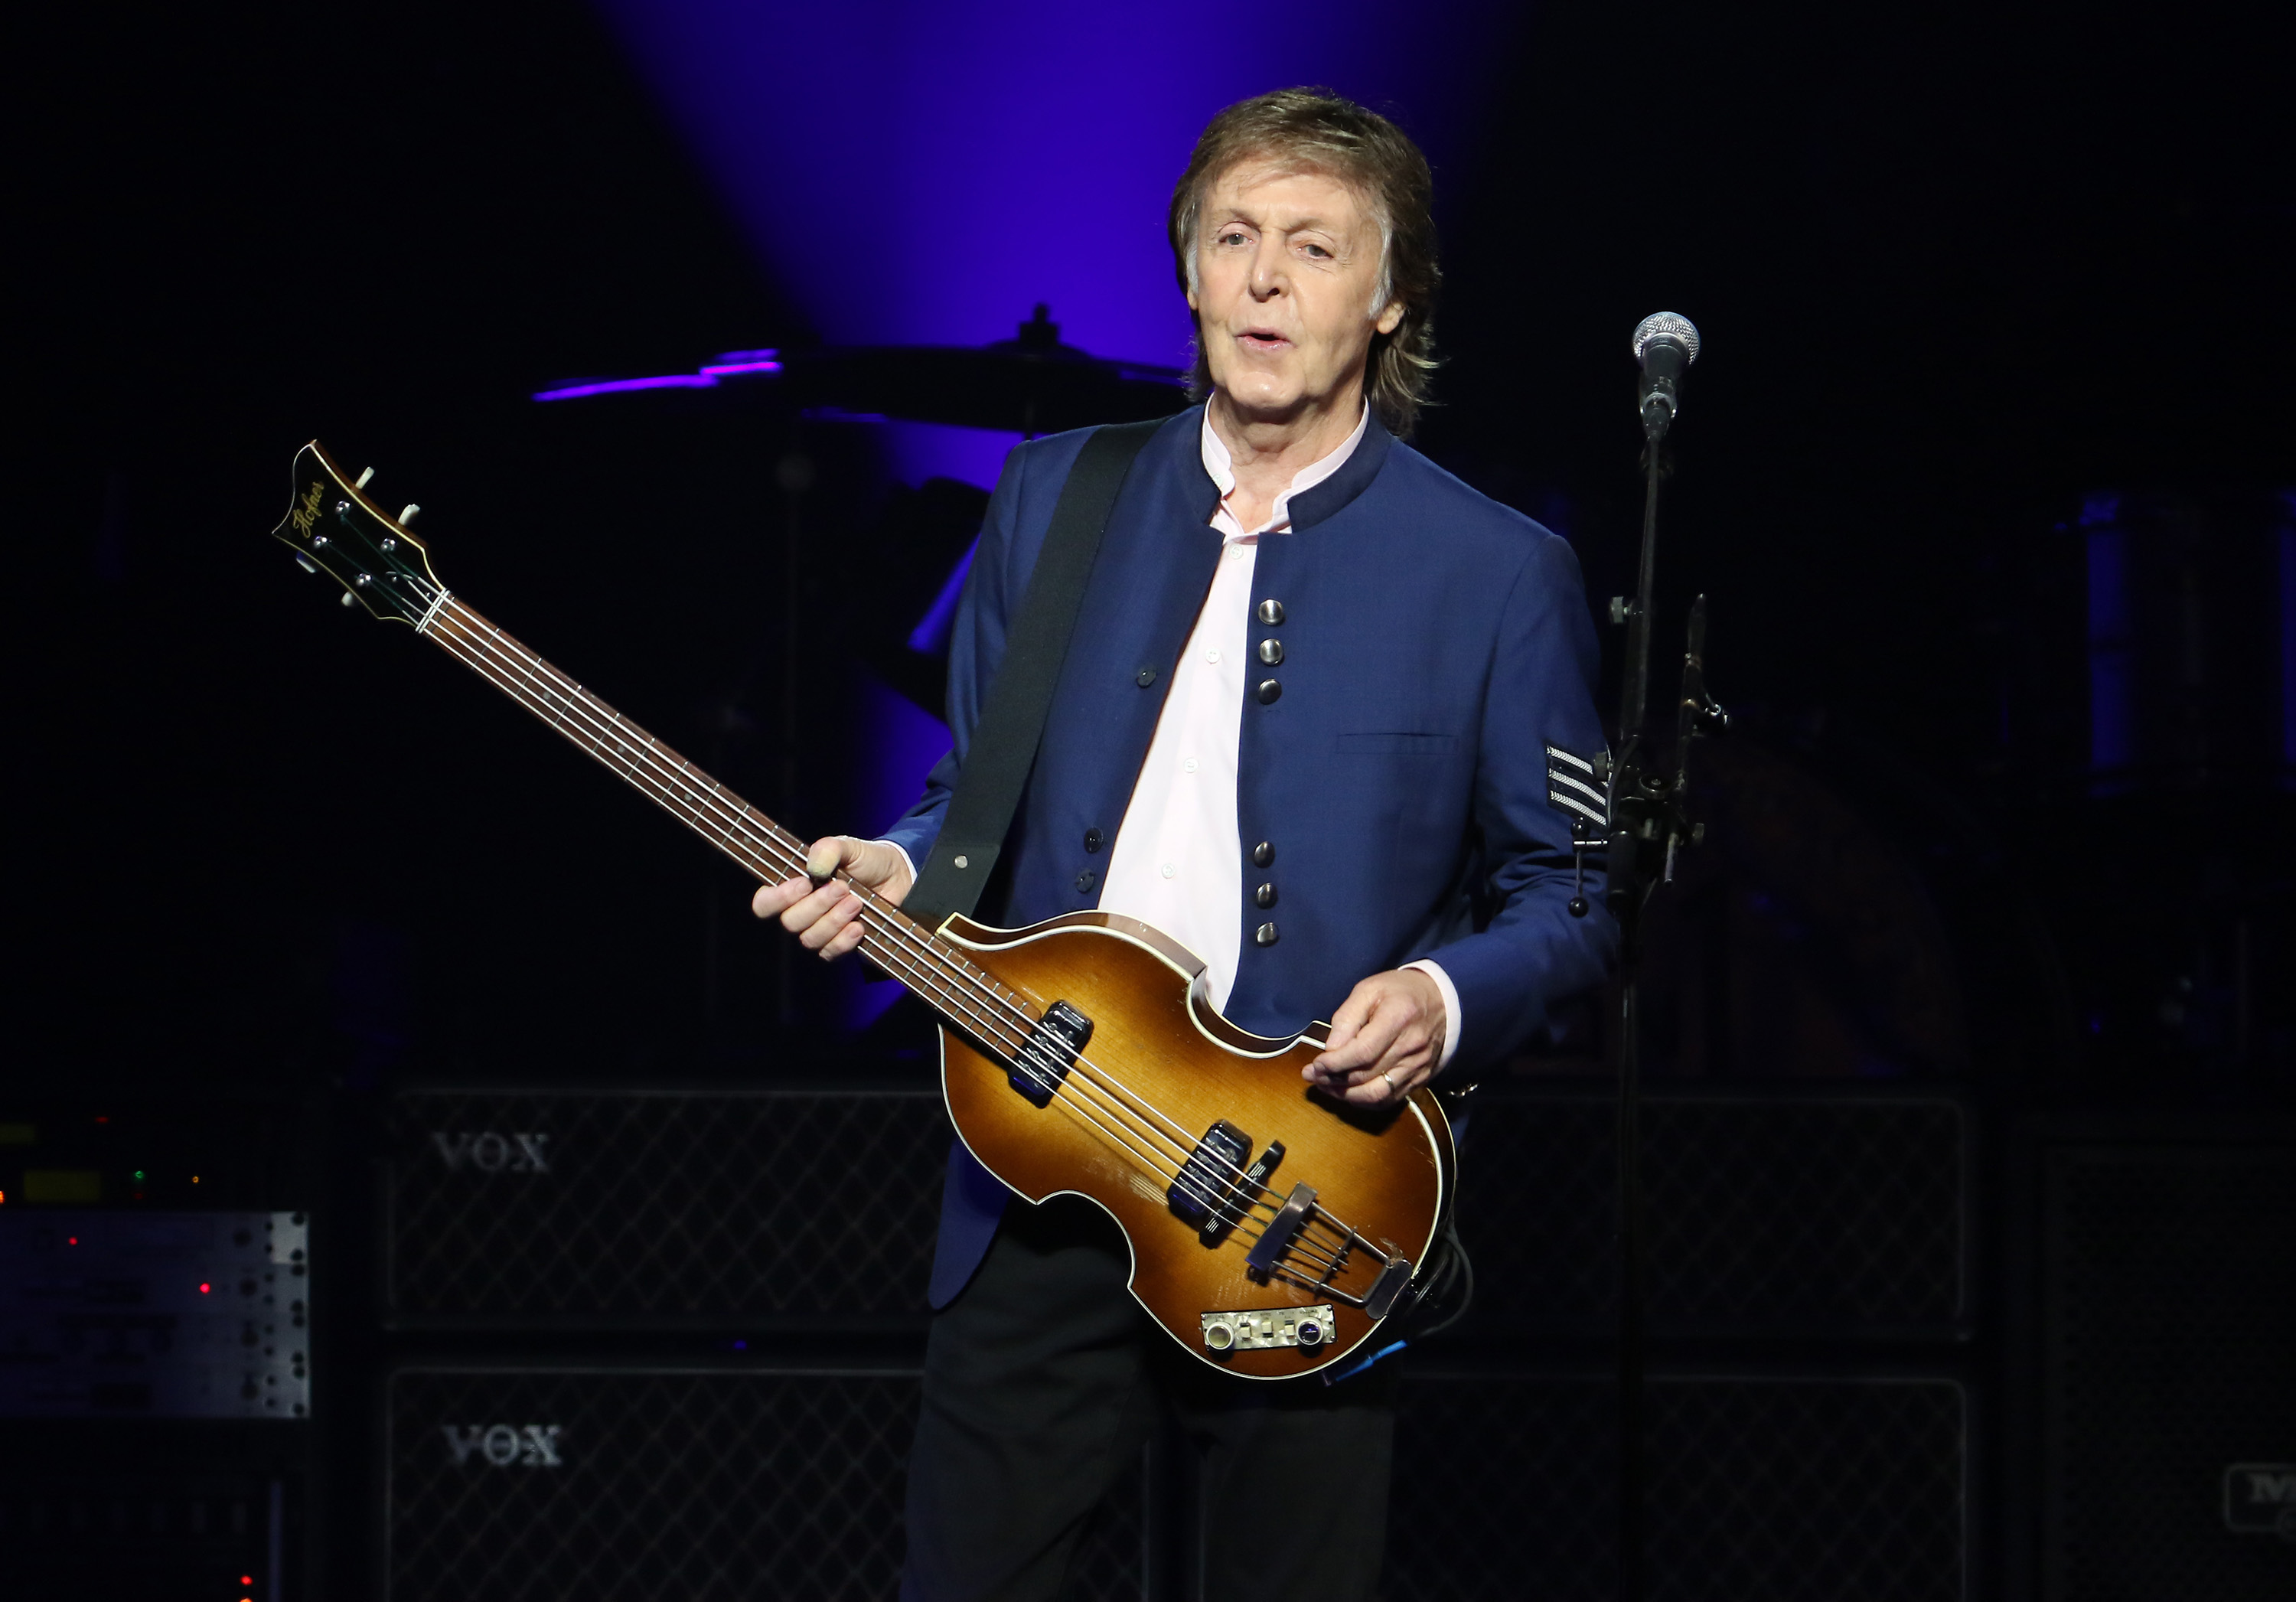 Paul McCartney performs at the American Airlines Arena in Miami, Florida